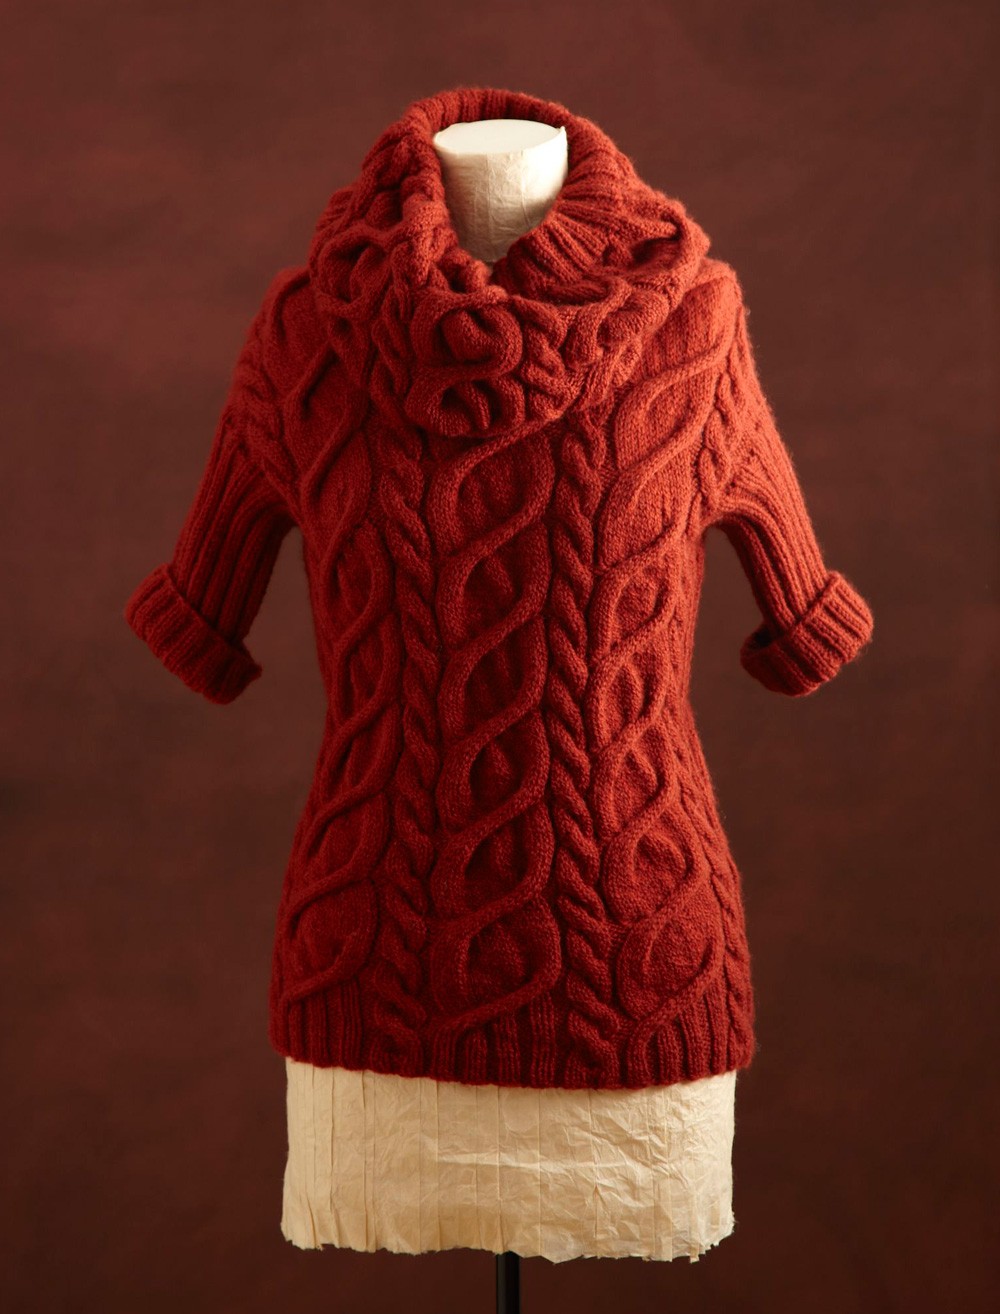 Cabled Pullover and Cowl Knit